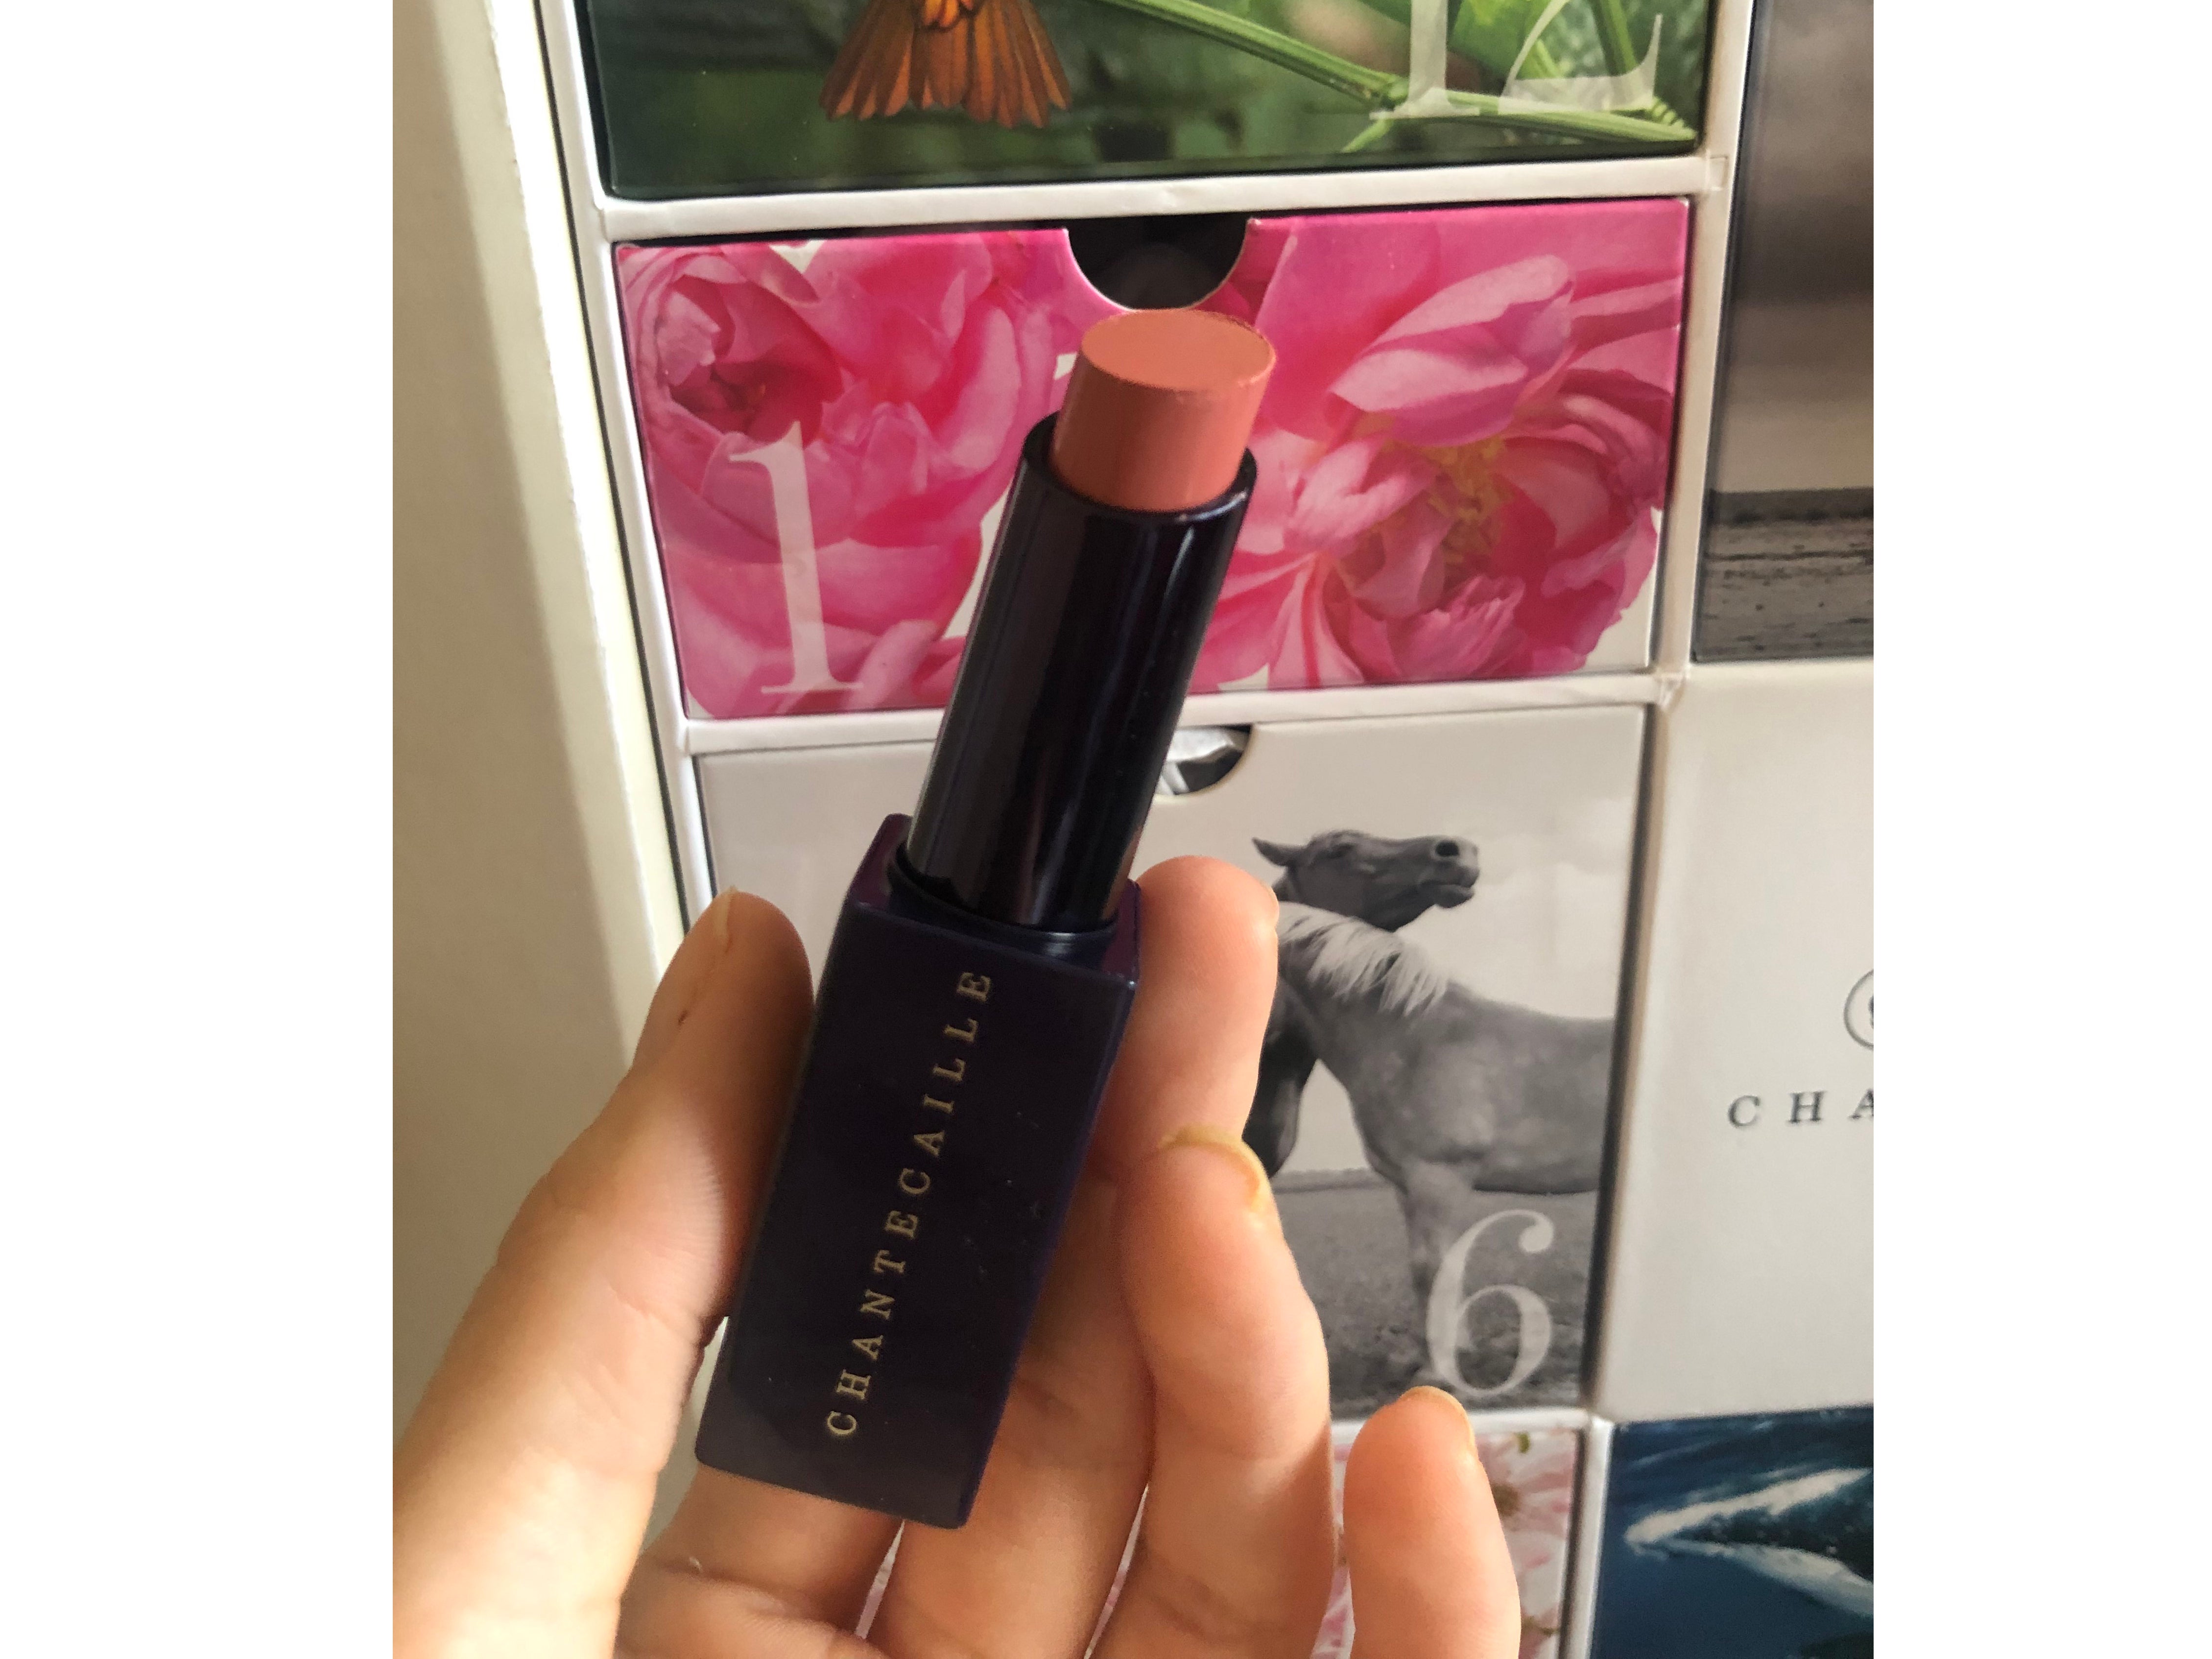 This sheer lipstick nourished our lips and gave a ‘just bitten’ look